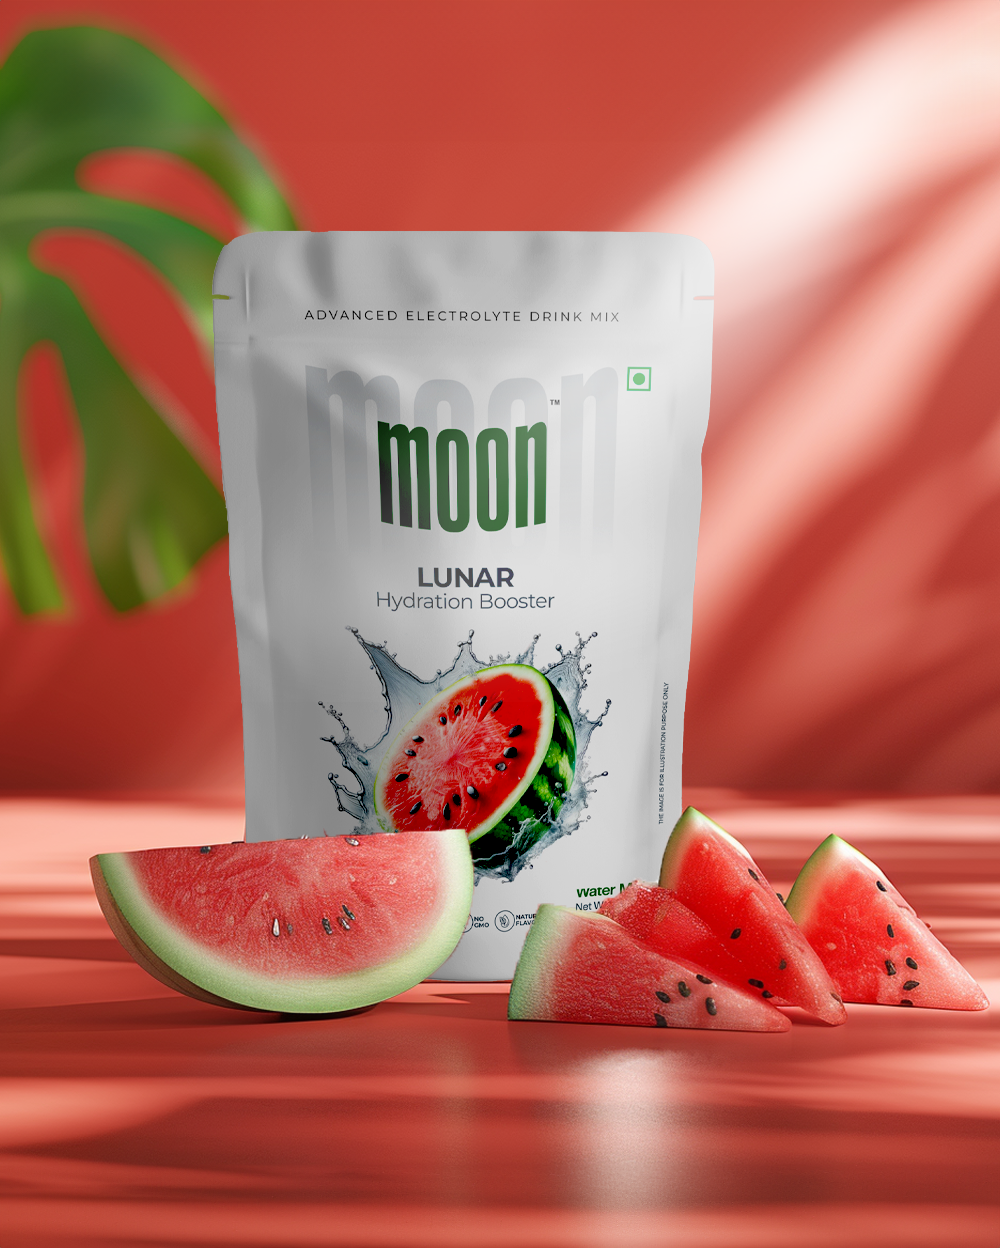 A pouch of Moon Lunar Watermelon + Lychee Hydration Booster electrolyte drink mix by MOONFREEZE FOODS PRIVATE LIMITED, displayed with fresh watermelon slices on a reflective surface.